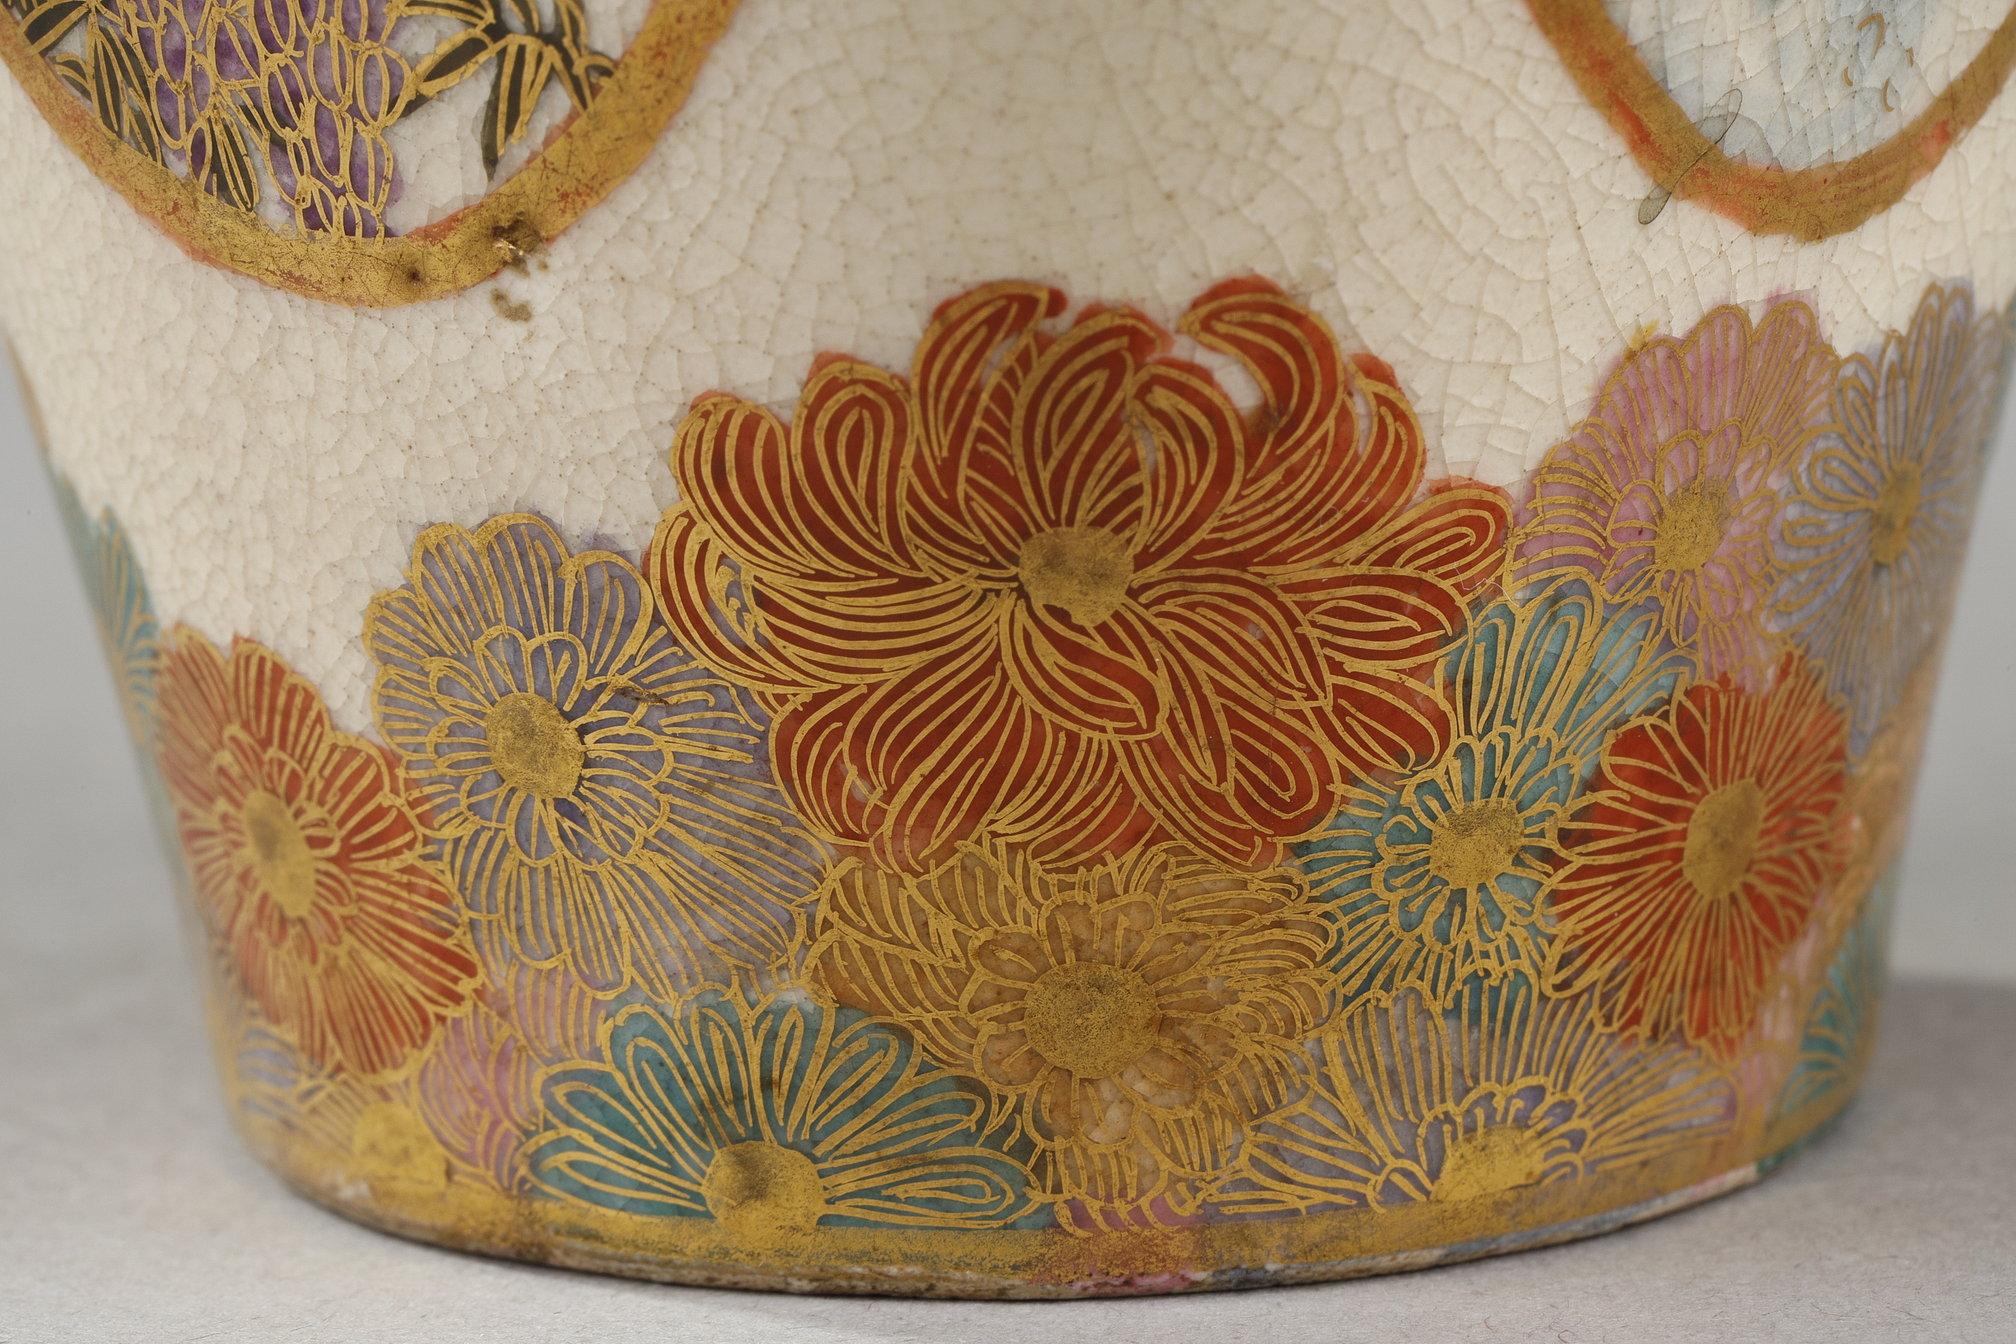 Satsuma porcelain vase from the Meiji period, Japan For Sale 10